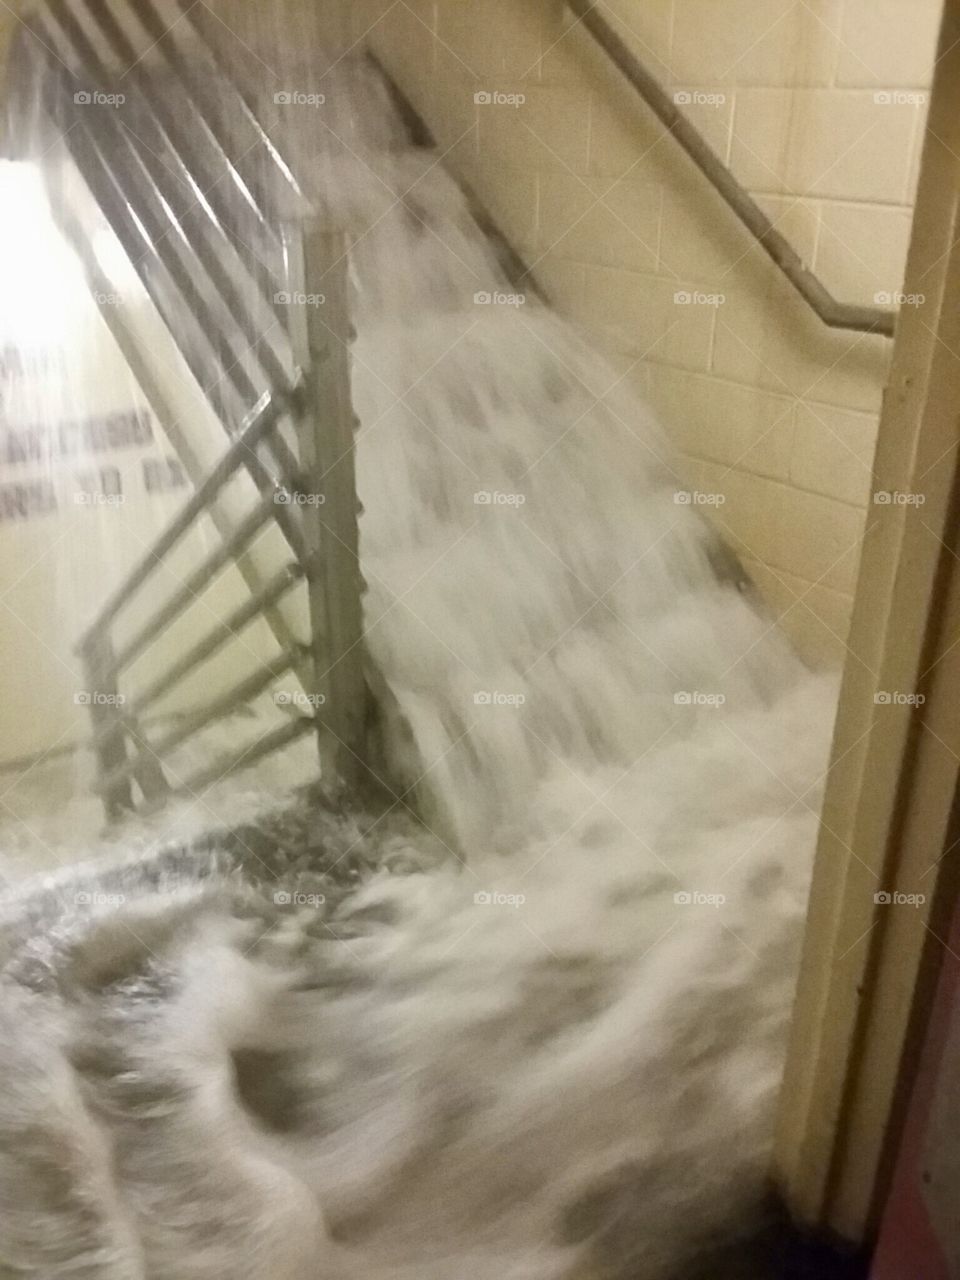 Water falls in the exit. No where to run nowhere to hide.